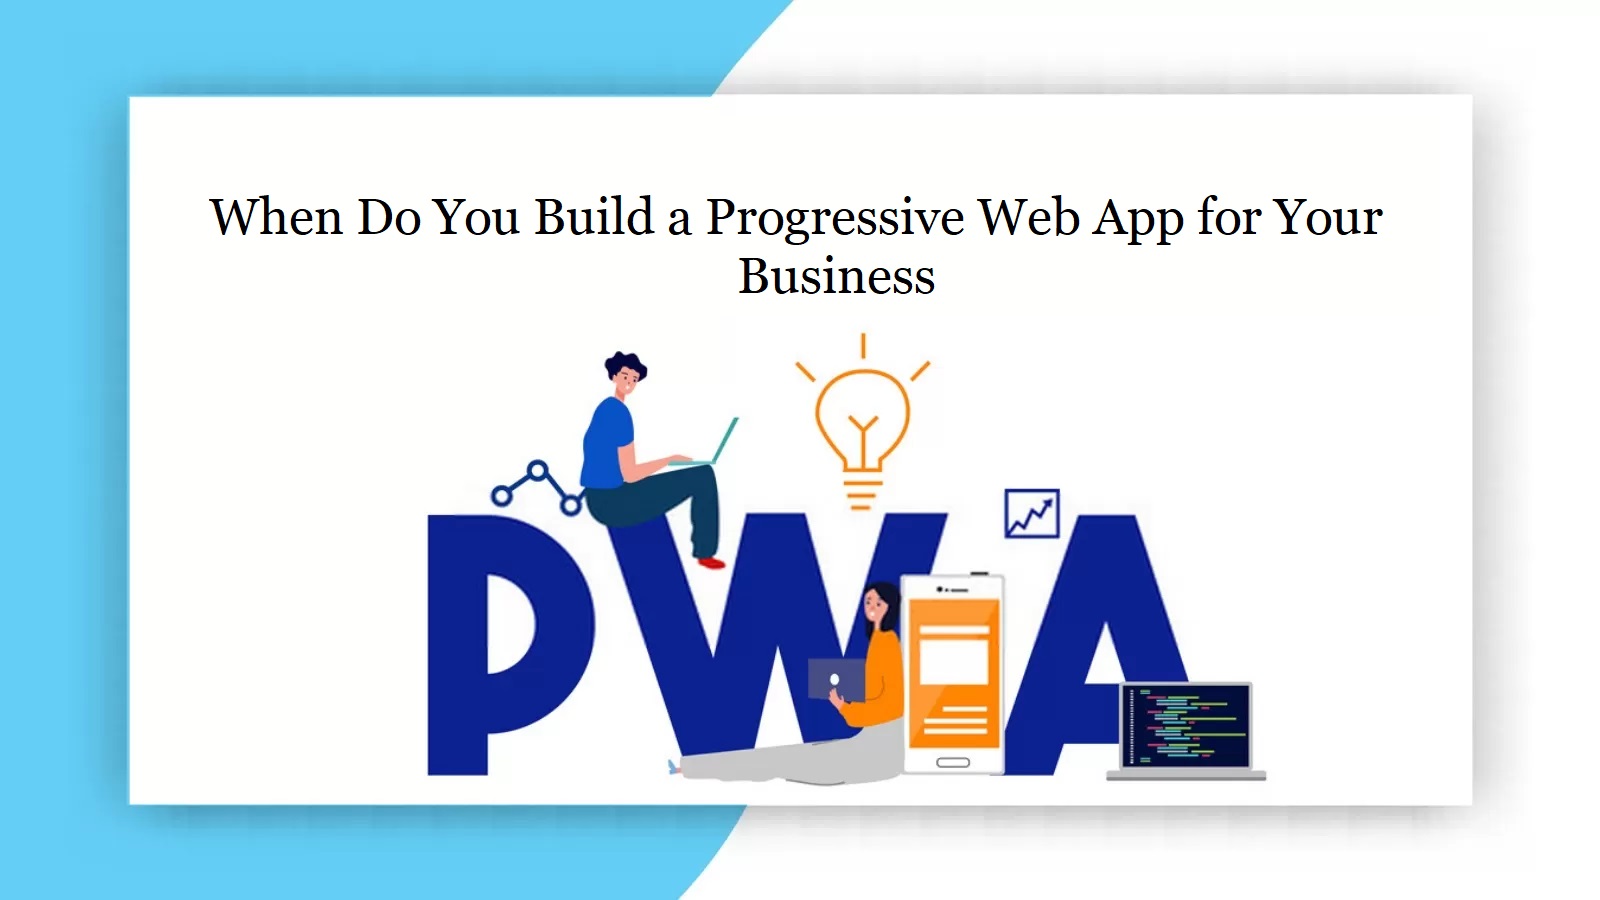 When Do You Build a Progressive Web App for Your Business